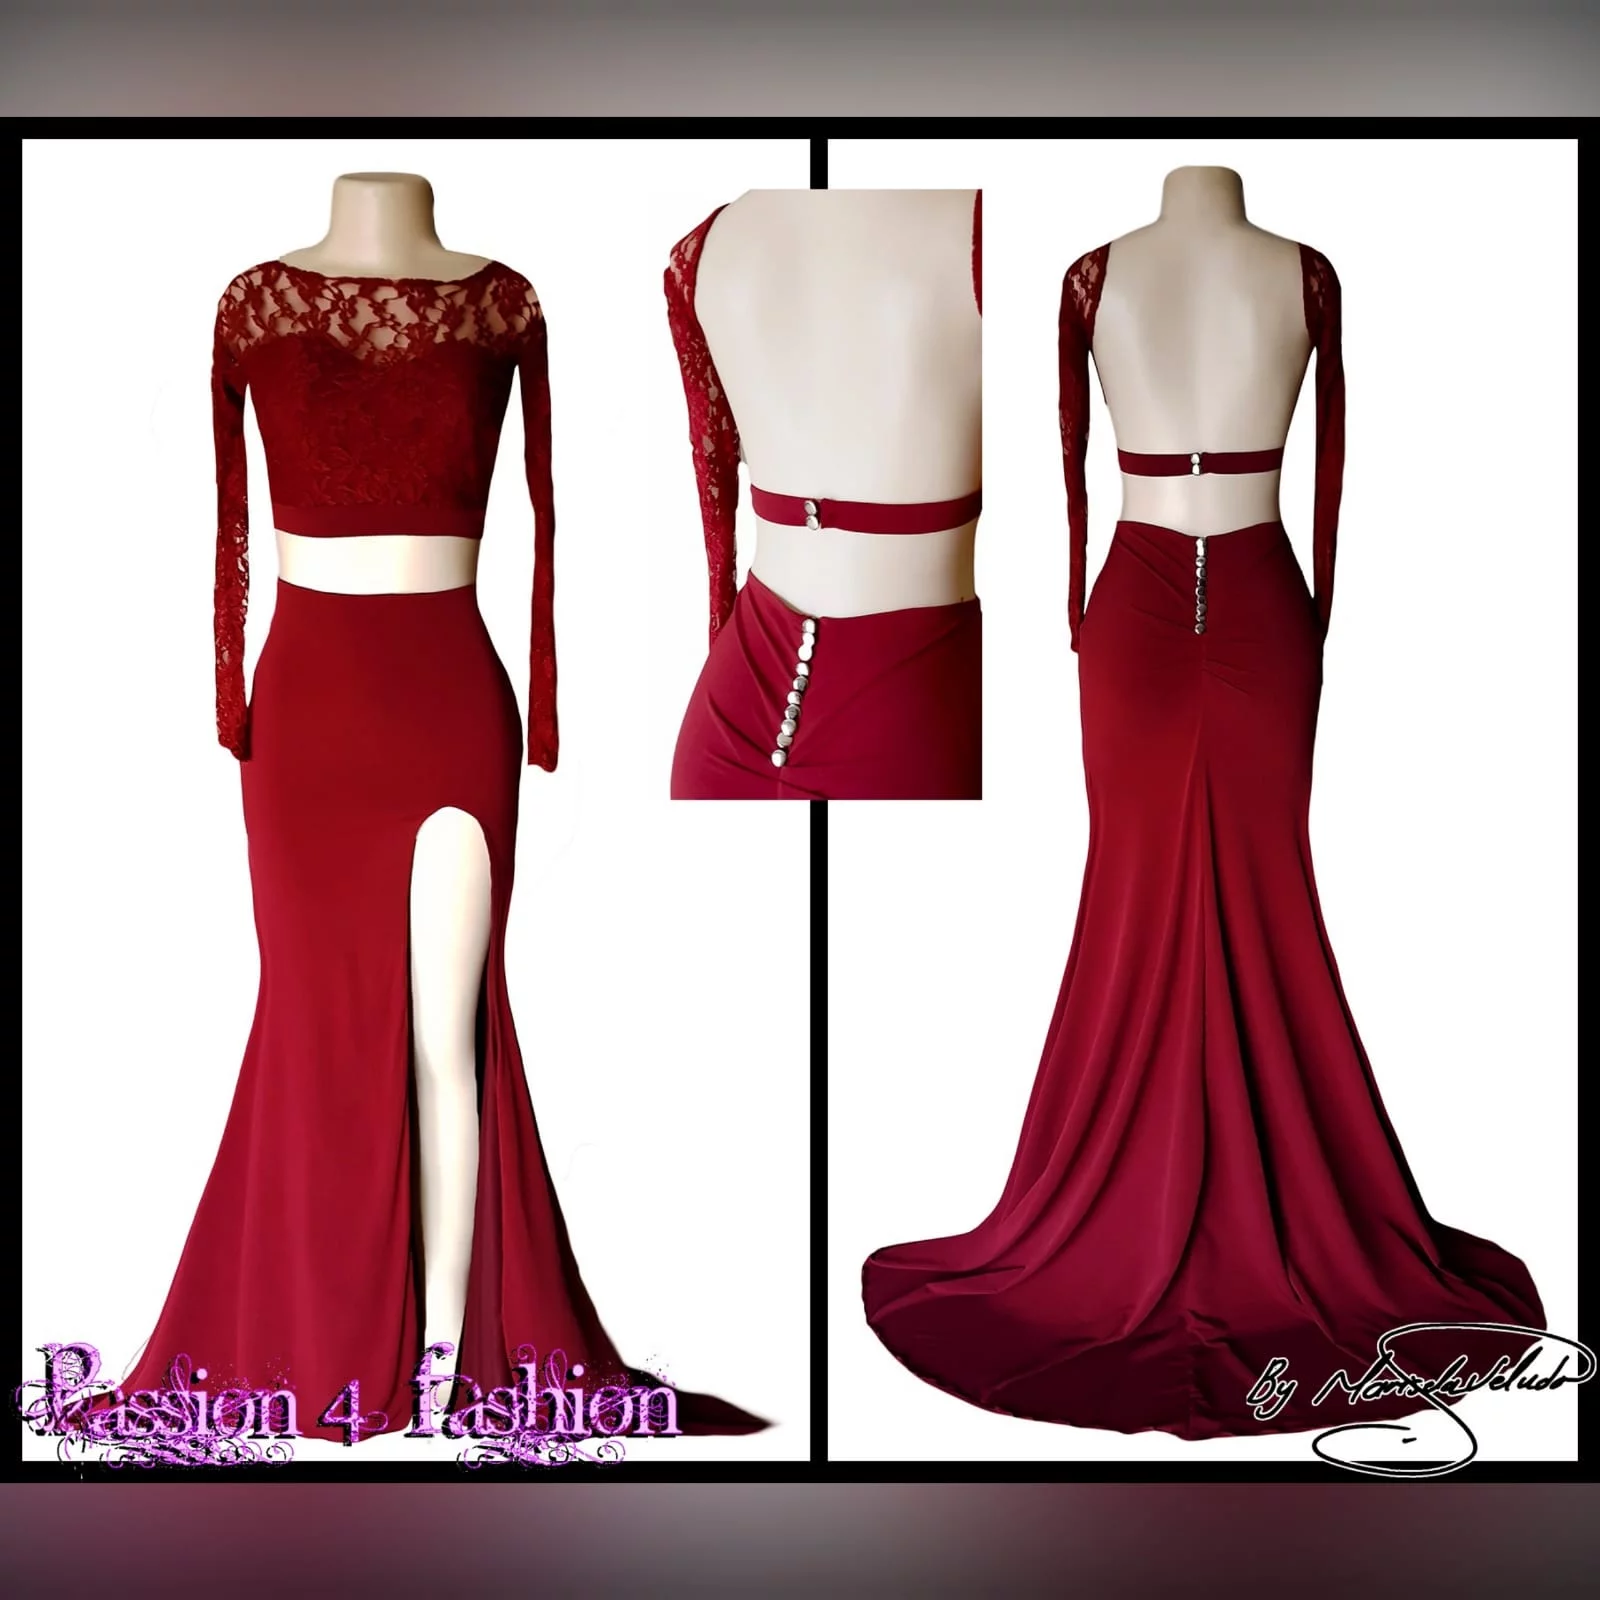 Red long sheer lace bodice matric dance dress 8 red long sheer lace bodice matric dance dress. Long off the shoulder lace sleeves with a rounded open back, slit and train.